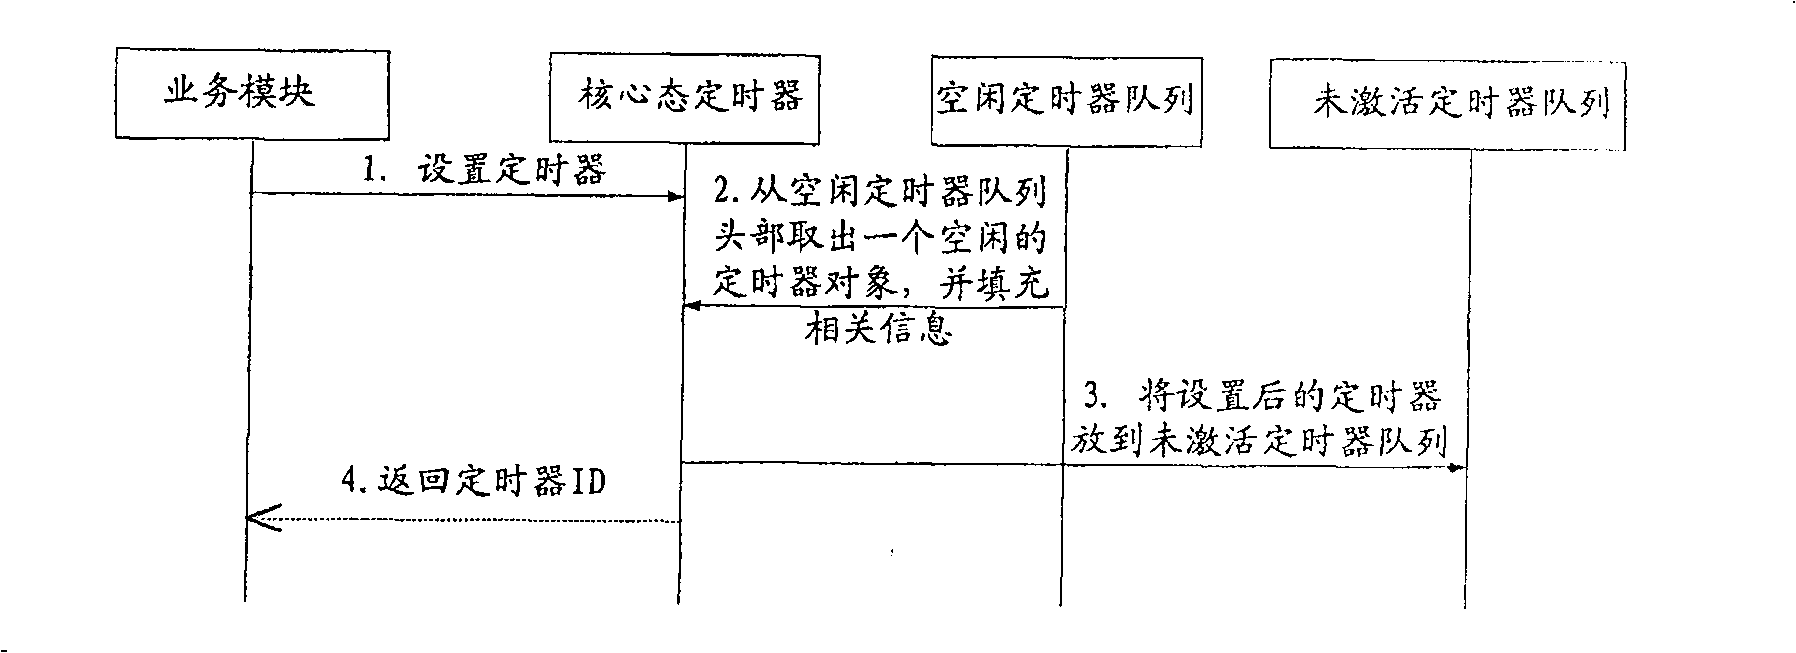 Distributed system timing method and system